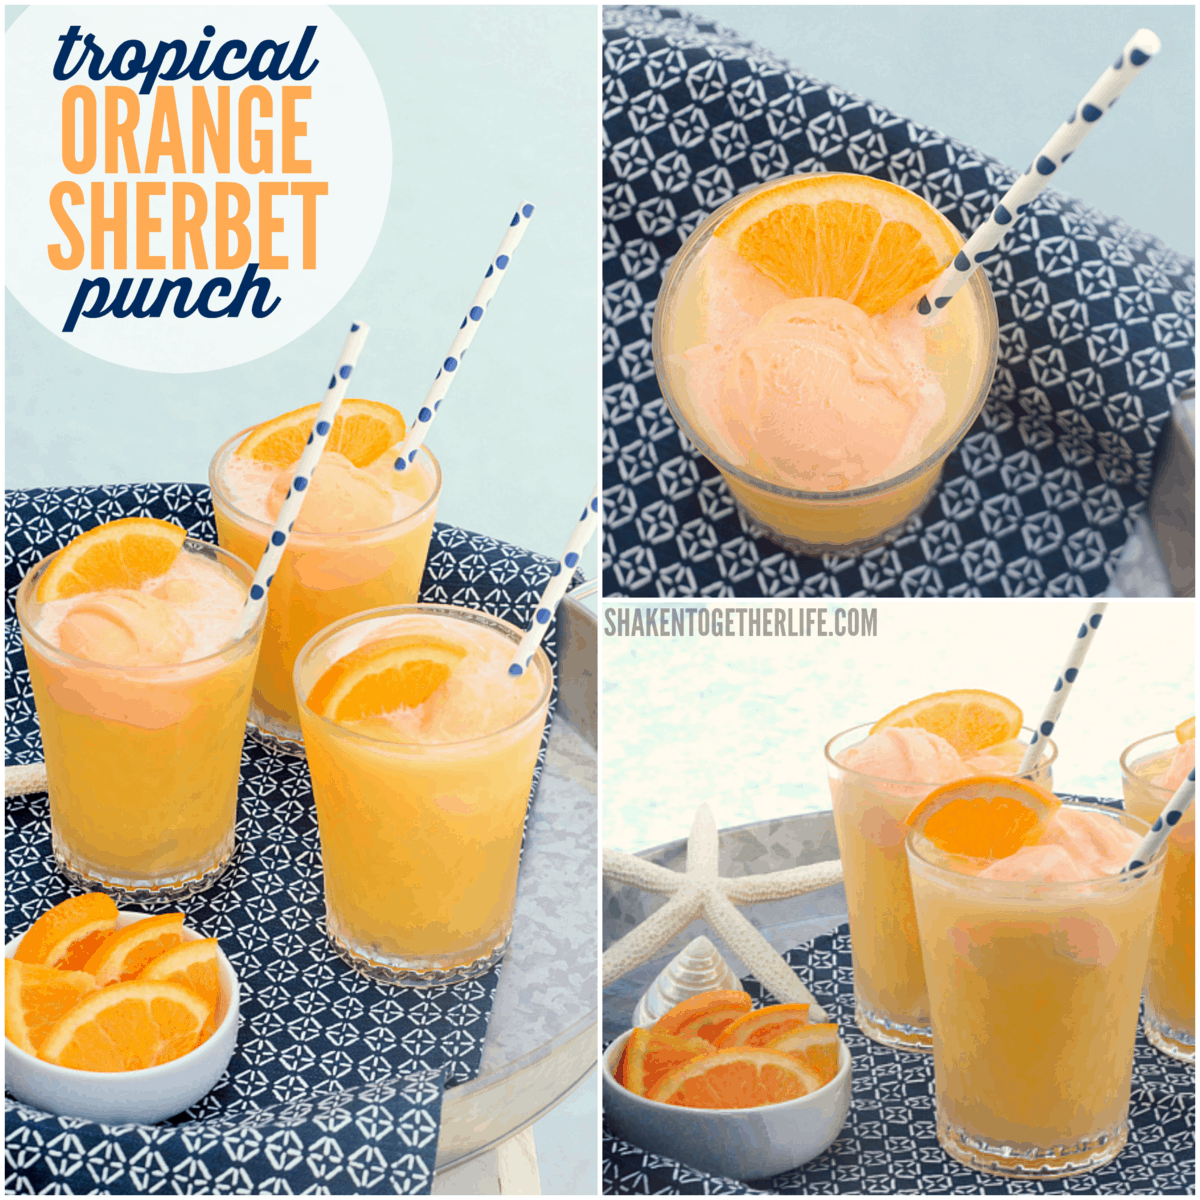 Fruity and fizzy and topped with orange sherbet, our Tropical Orange Sherbet Punch is a Summer family favorite!